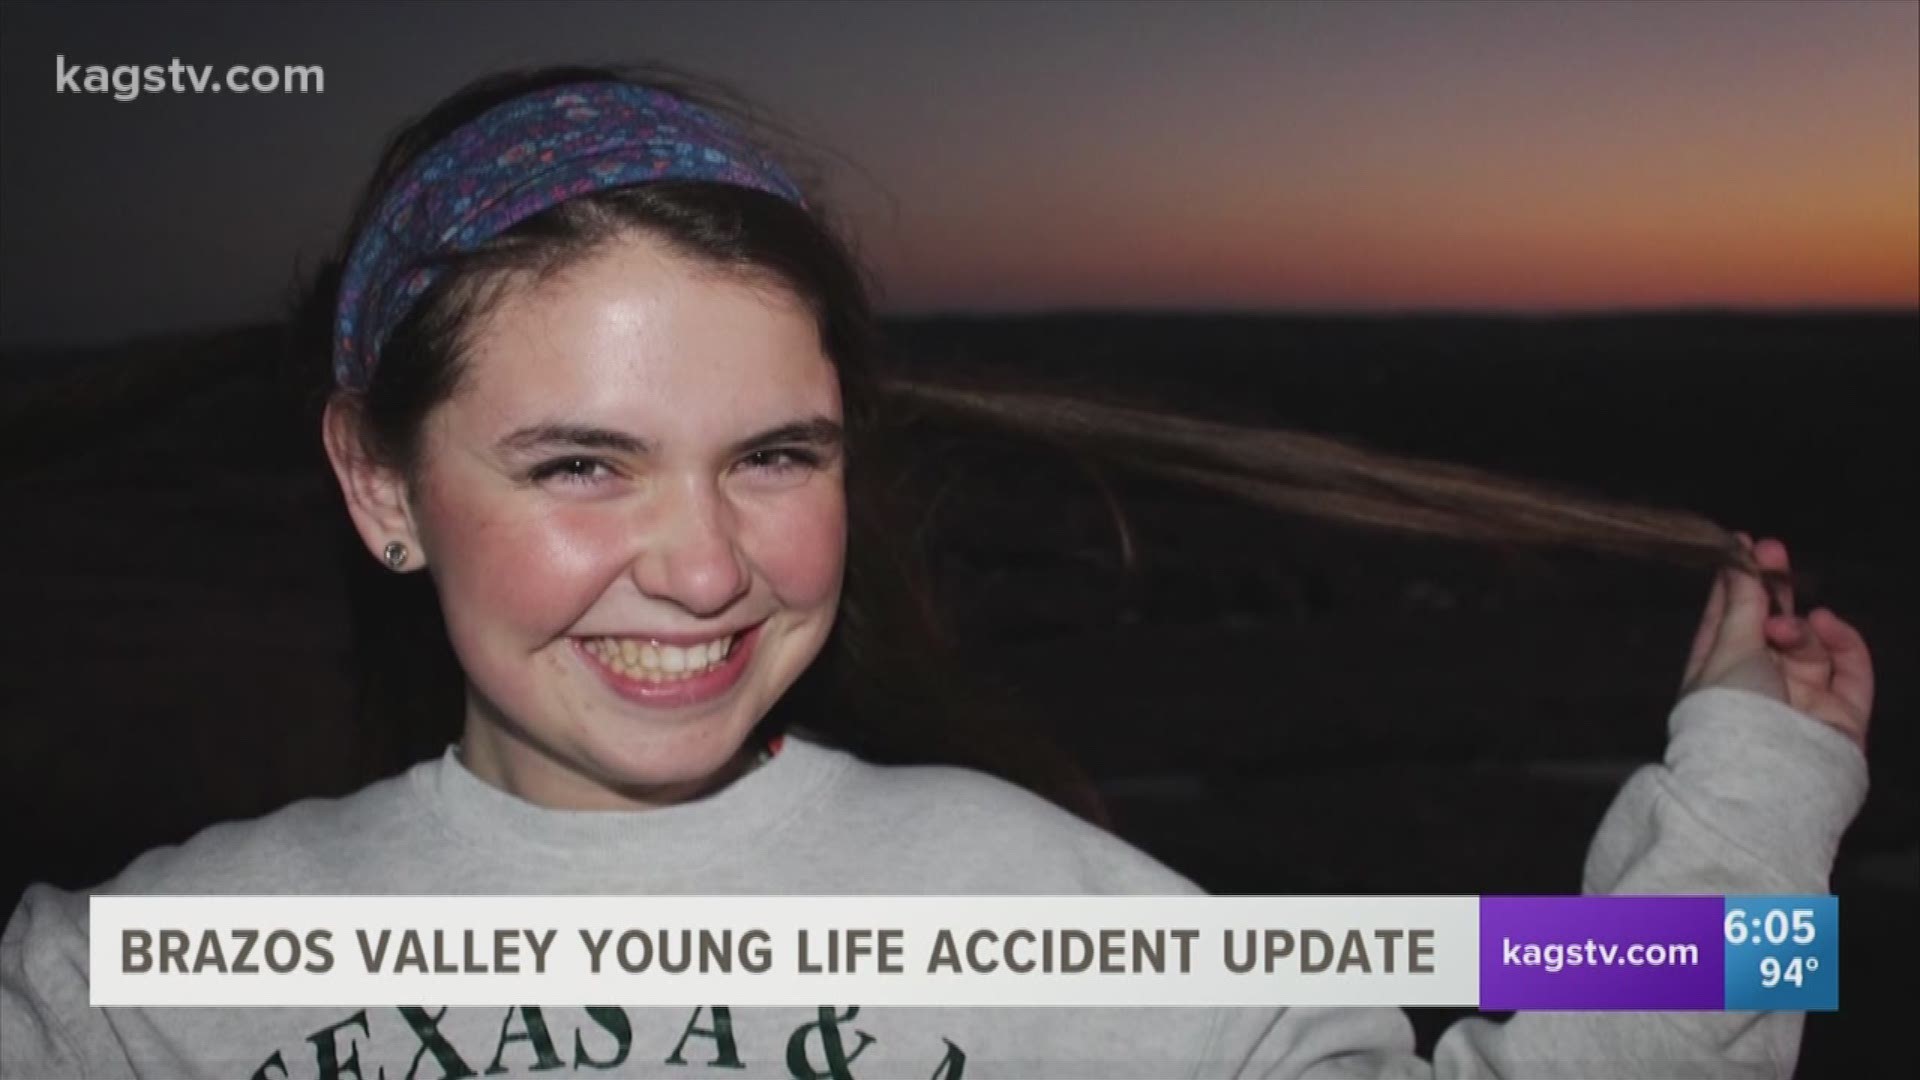 A tragic car accident over the weekend took the life of one A&M student and Young Life volunteer. Two others were injured in the collision and are still in the hospital.